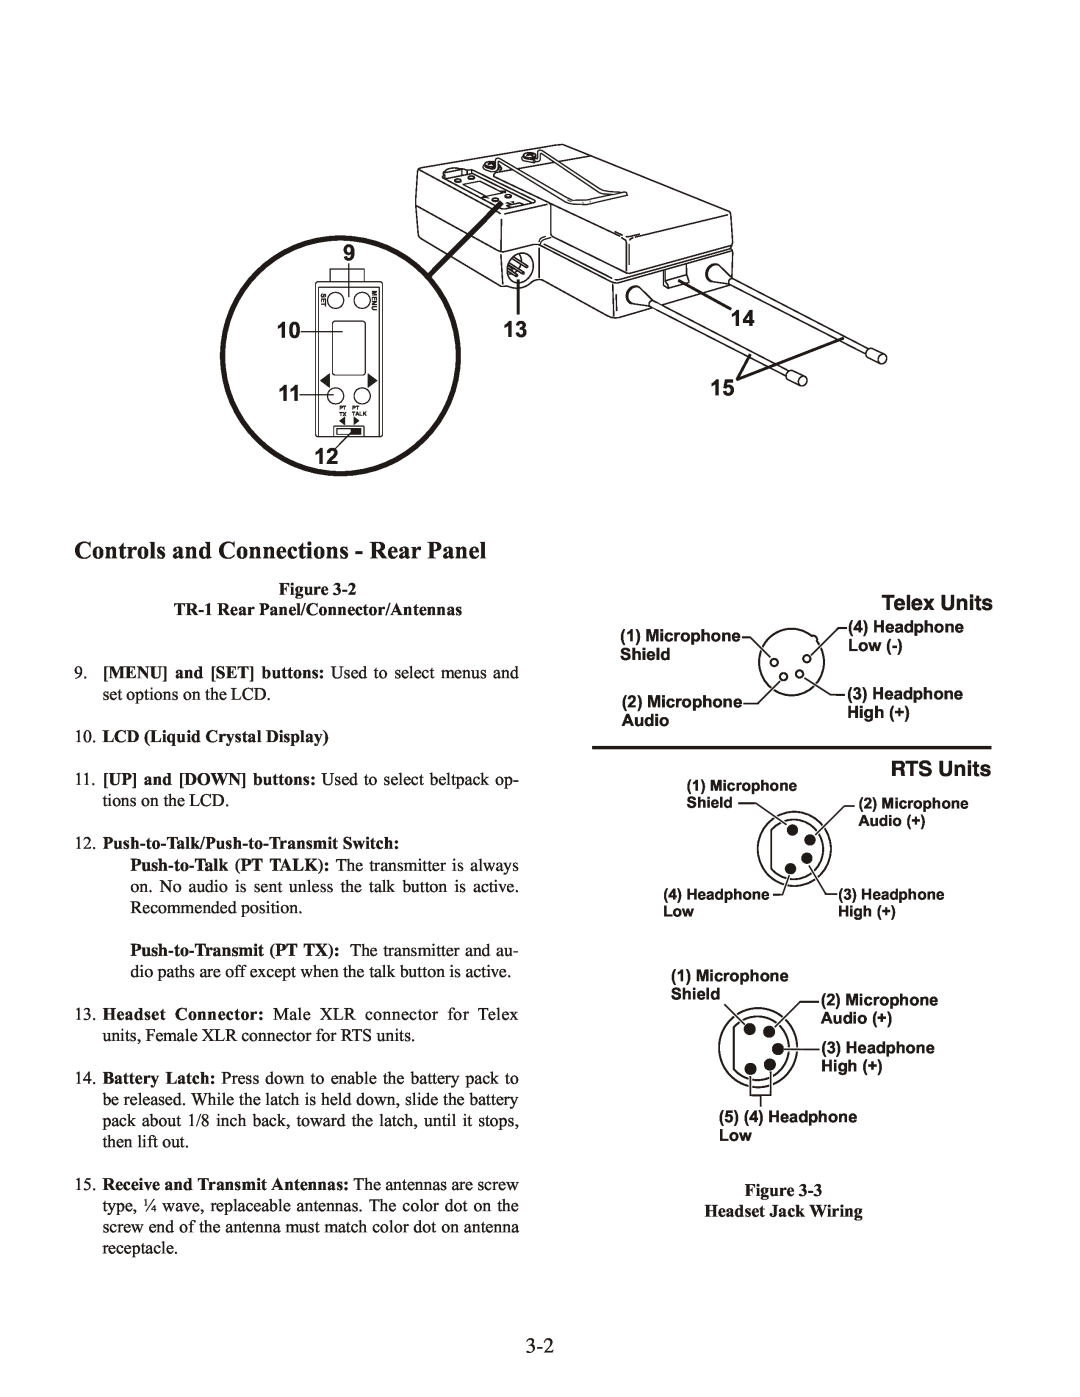 Telex BTR-1 Controls and Connections - Rear Panel, Telex Units, RTS Units, TR-1 Rear Panel/Connector/Antennas 